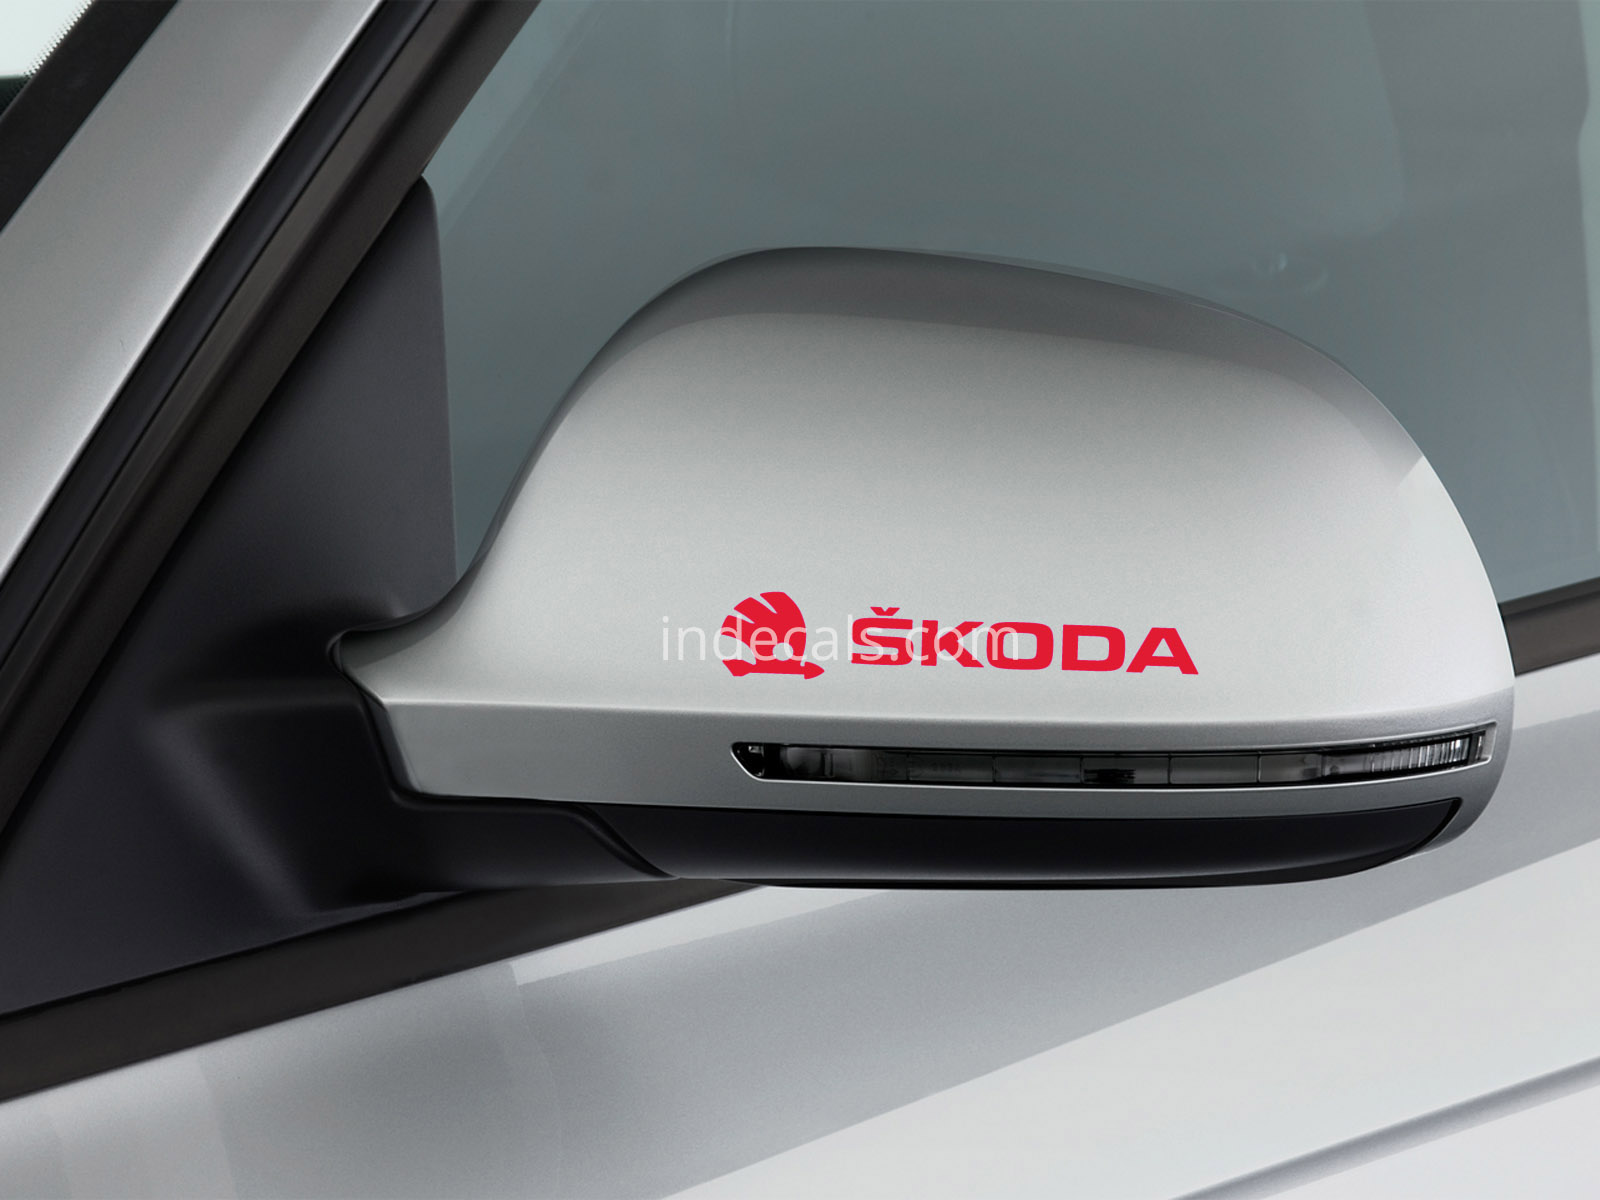 3 x Skoda Stickers for Mirrors - Red